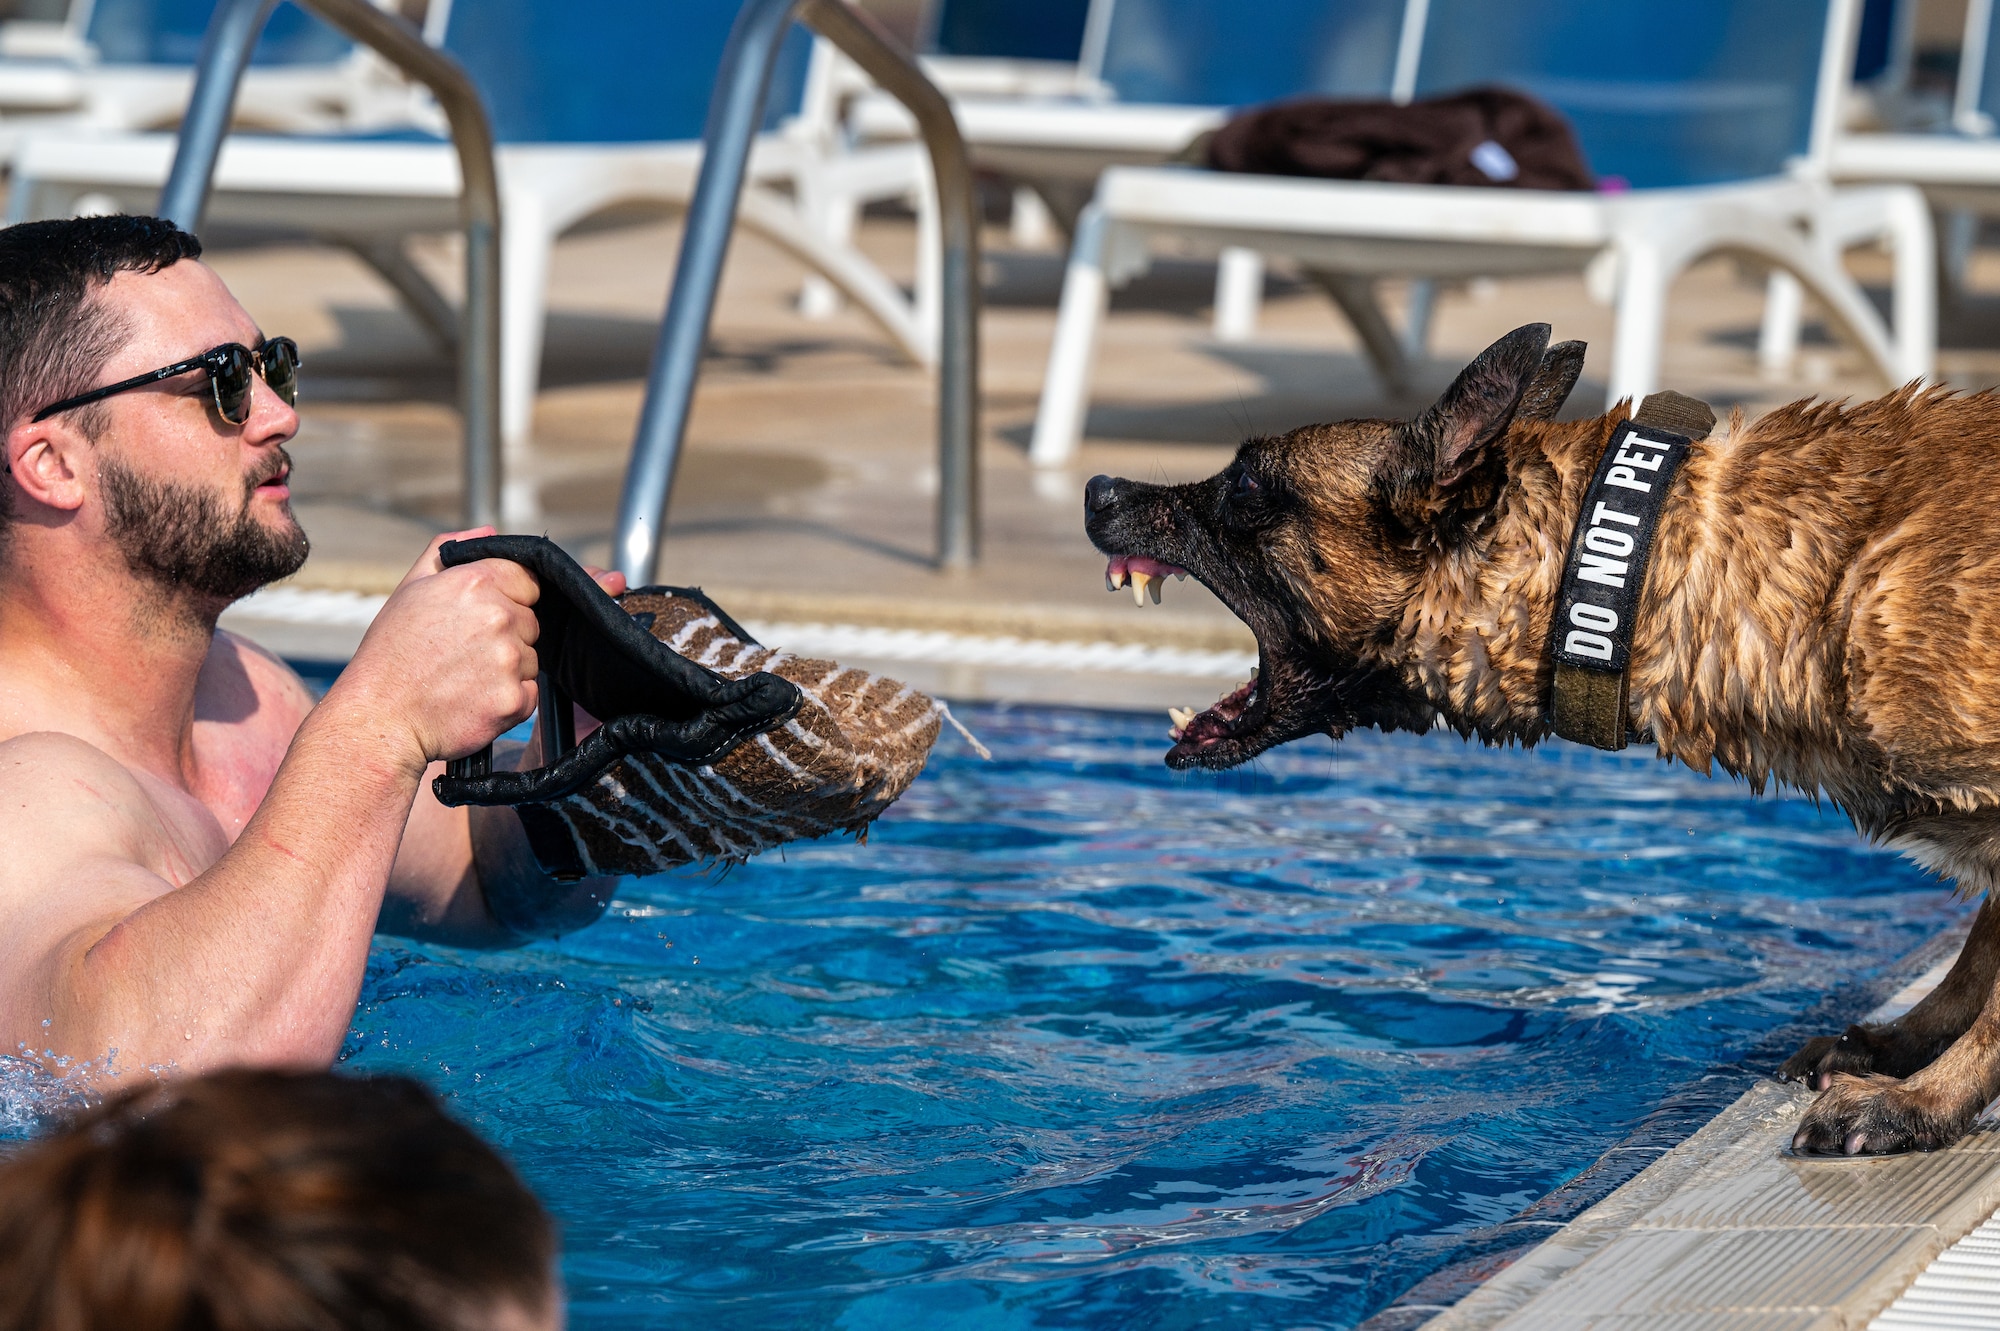 A U.S. Air Force Military Working Dog handler and his MWD participate in water familiarization training at an undisclosed location in the U.S. Central Command area of responsibility, Feb. 26, 2024. MWD handlers and their working dogs work together to train on commands in all environments to ensure they are ready to respond anytime, anywhere. (U.S. Air Force courtesy photo)